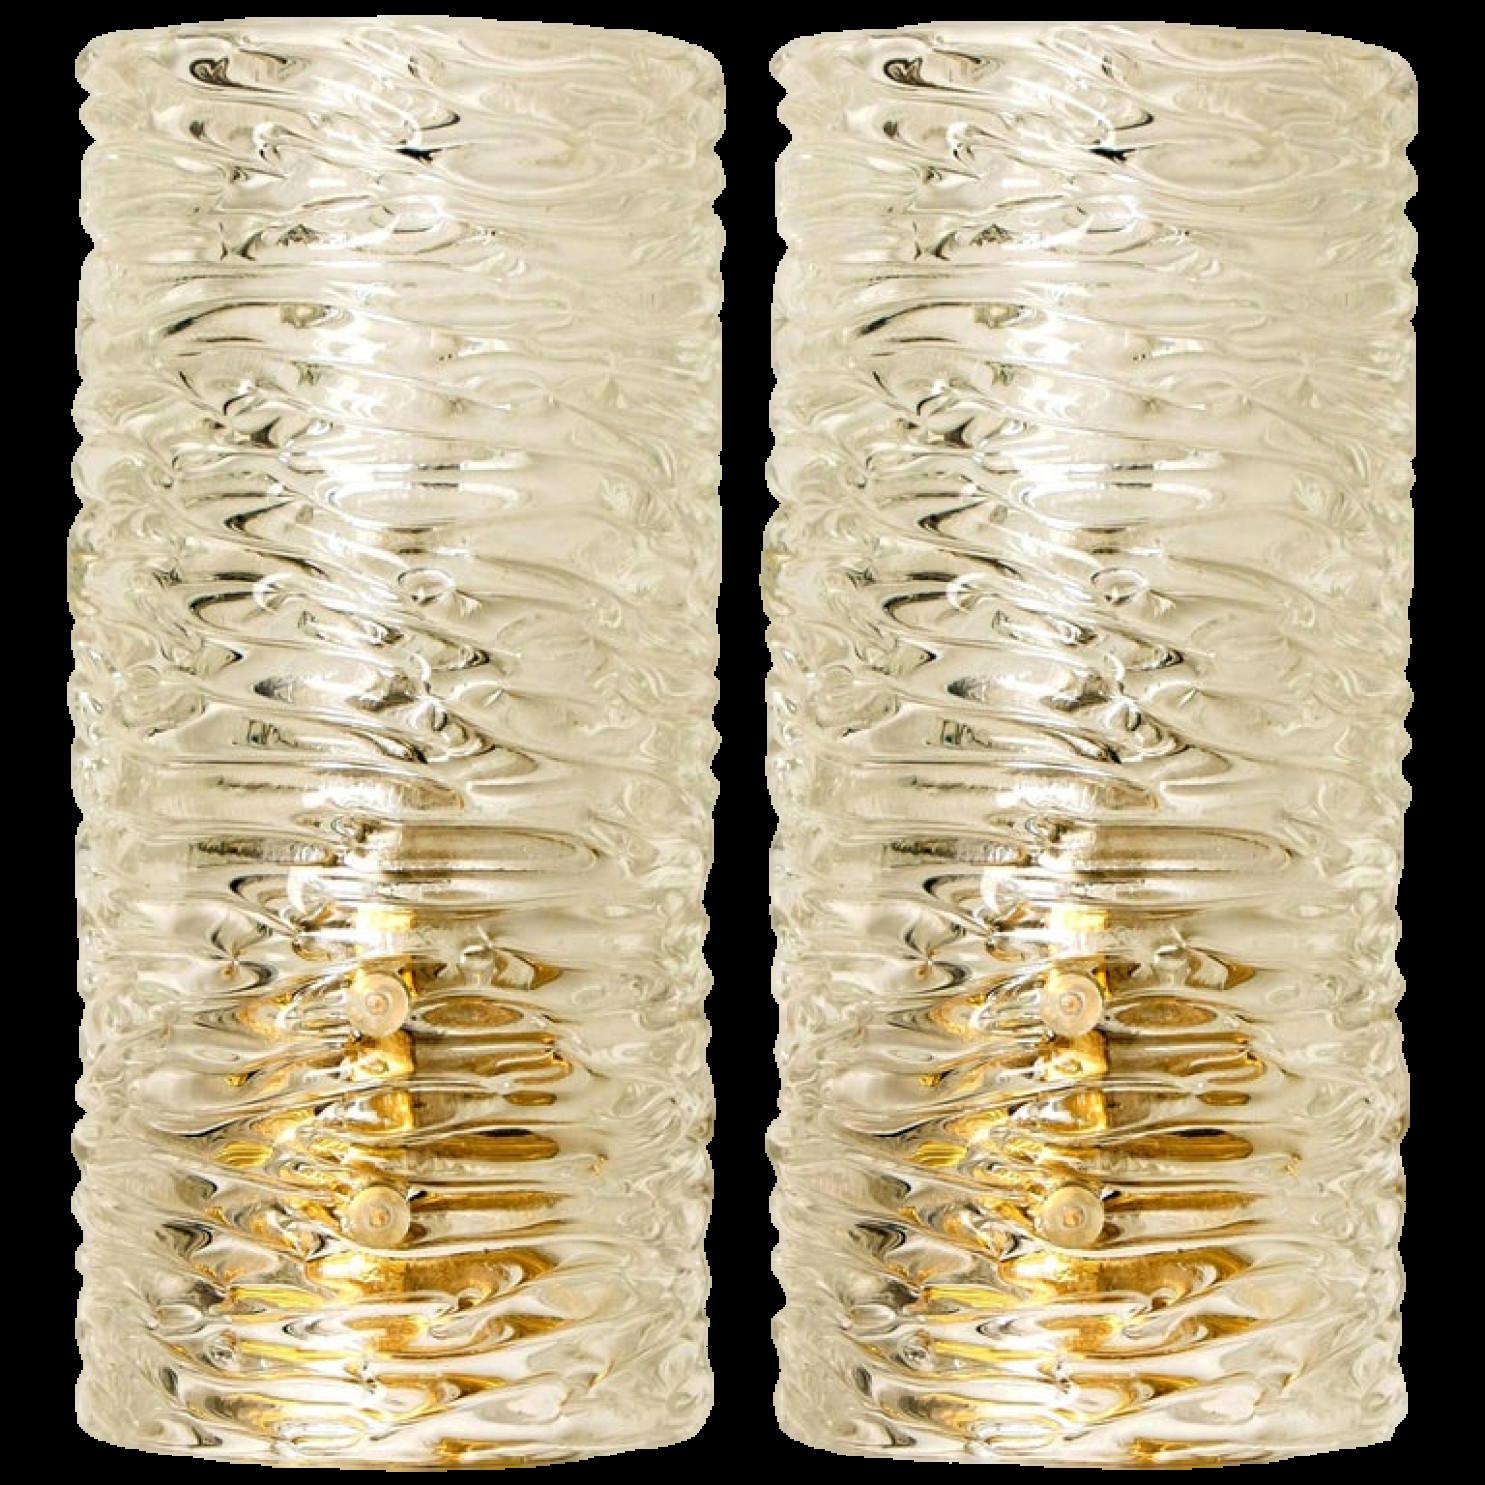 Two wall lights by J.T. Kalmar, Vienna, Austria, manufactured in circa 1960. This pair is handmade and high end. Each wall light has a half round wave textured glass shade with a brass back plate,

The wave texture gives a nice diffuse light effect